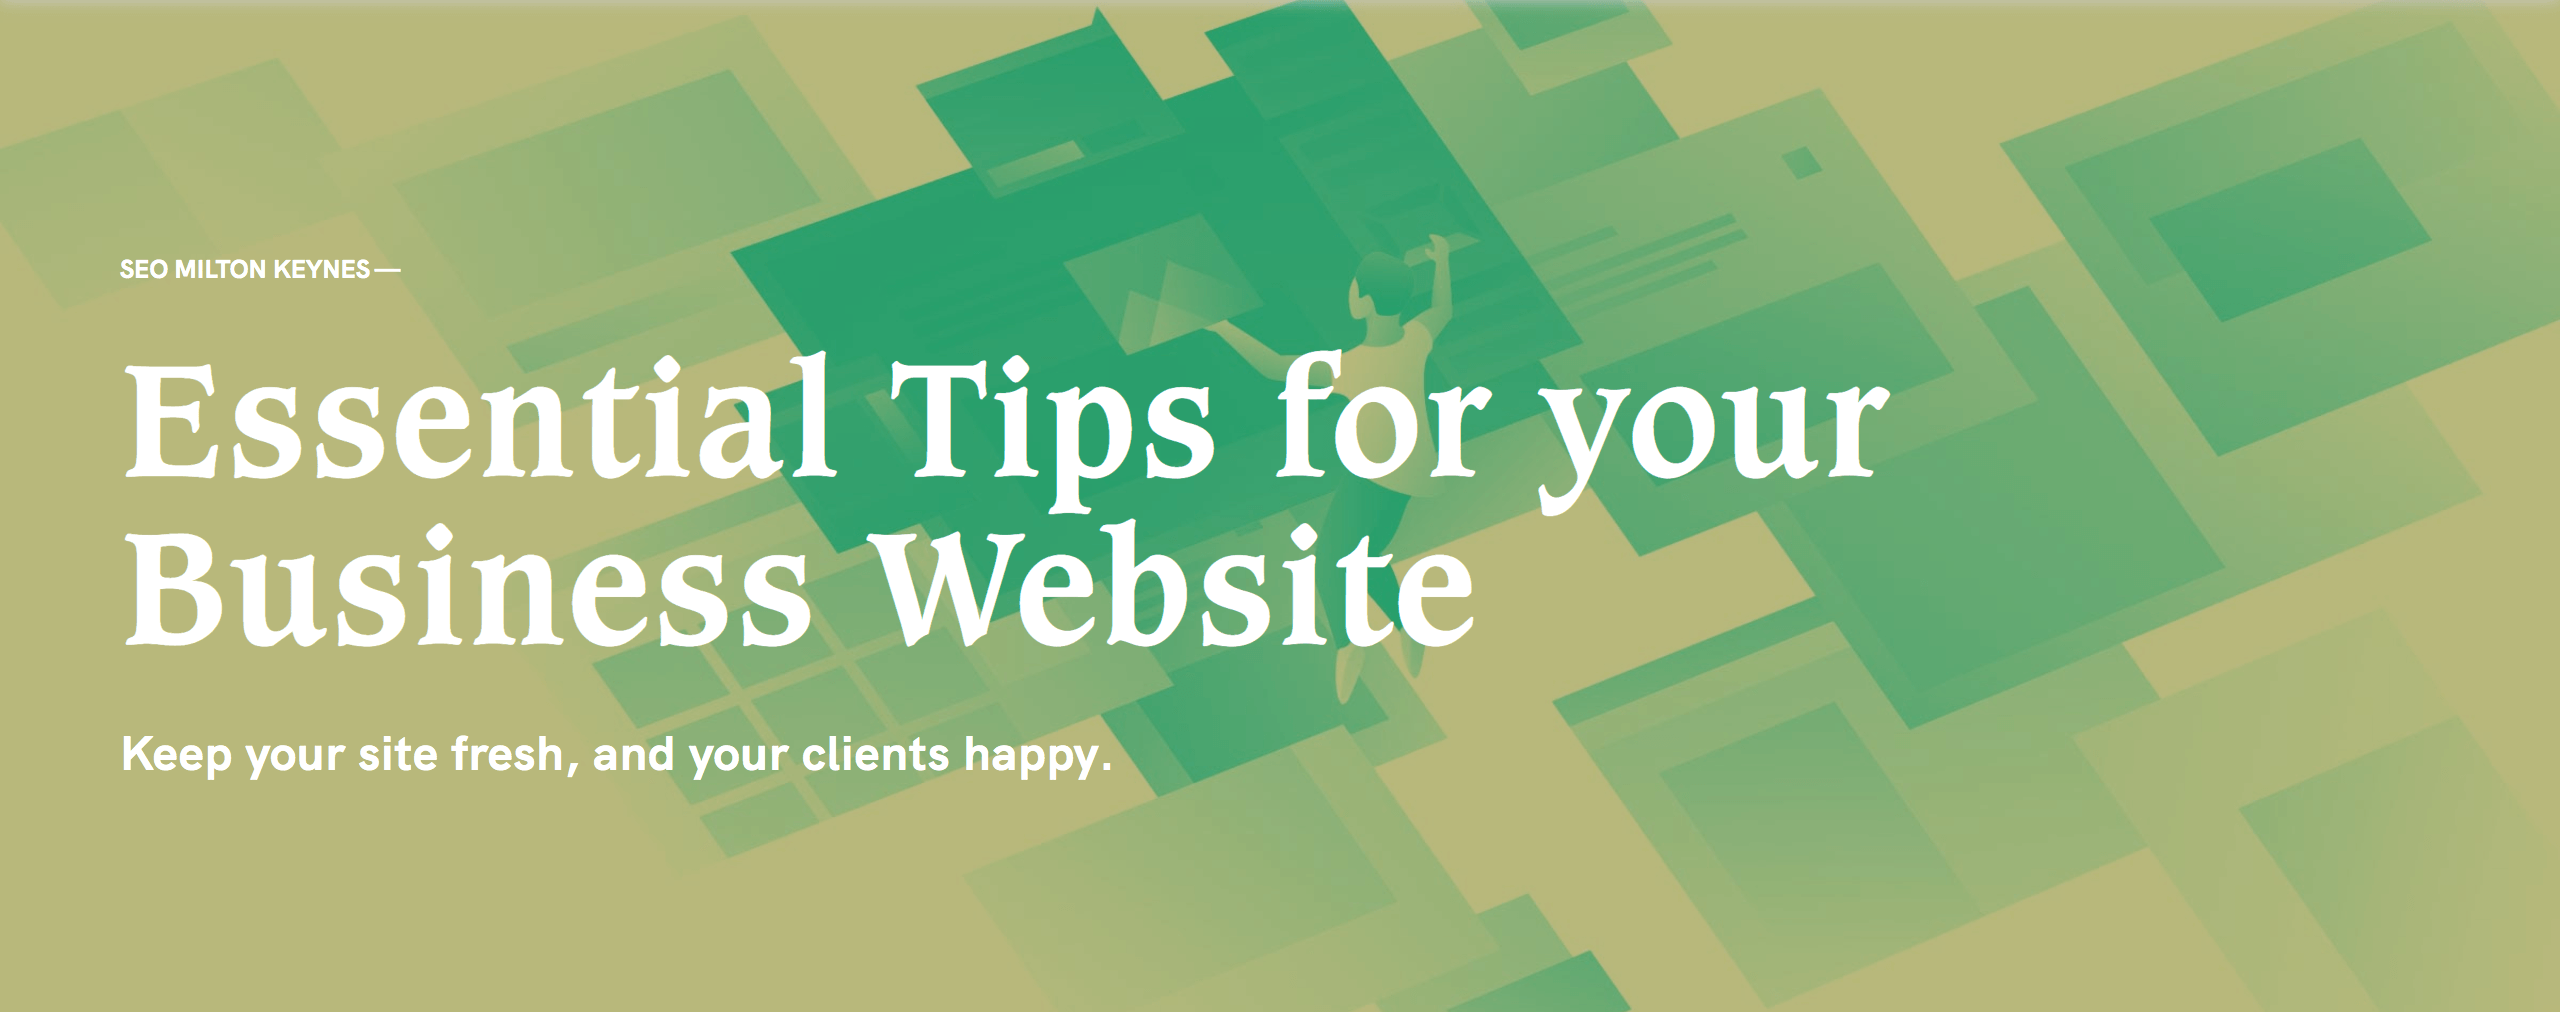 essential tips for your business website